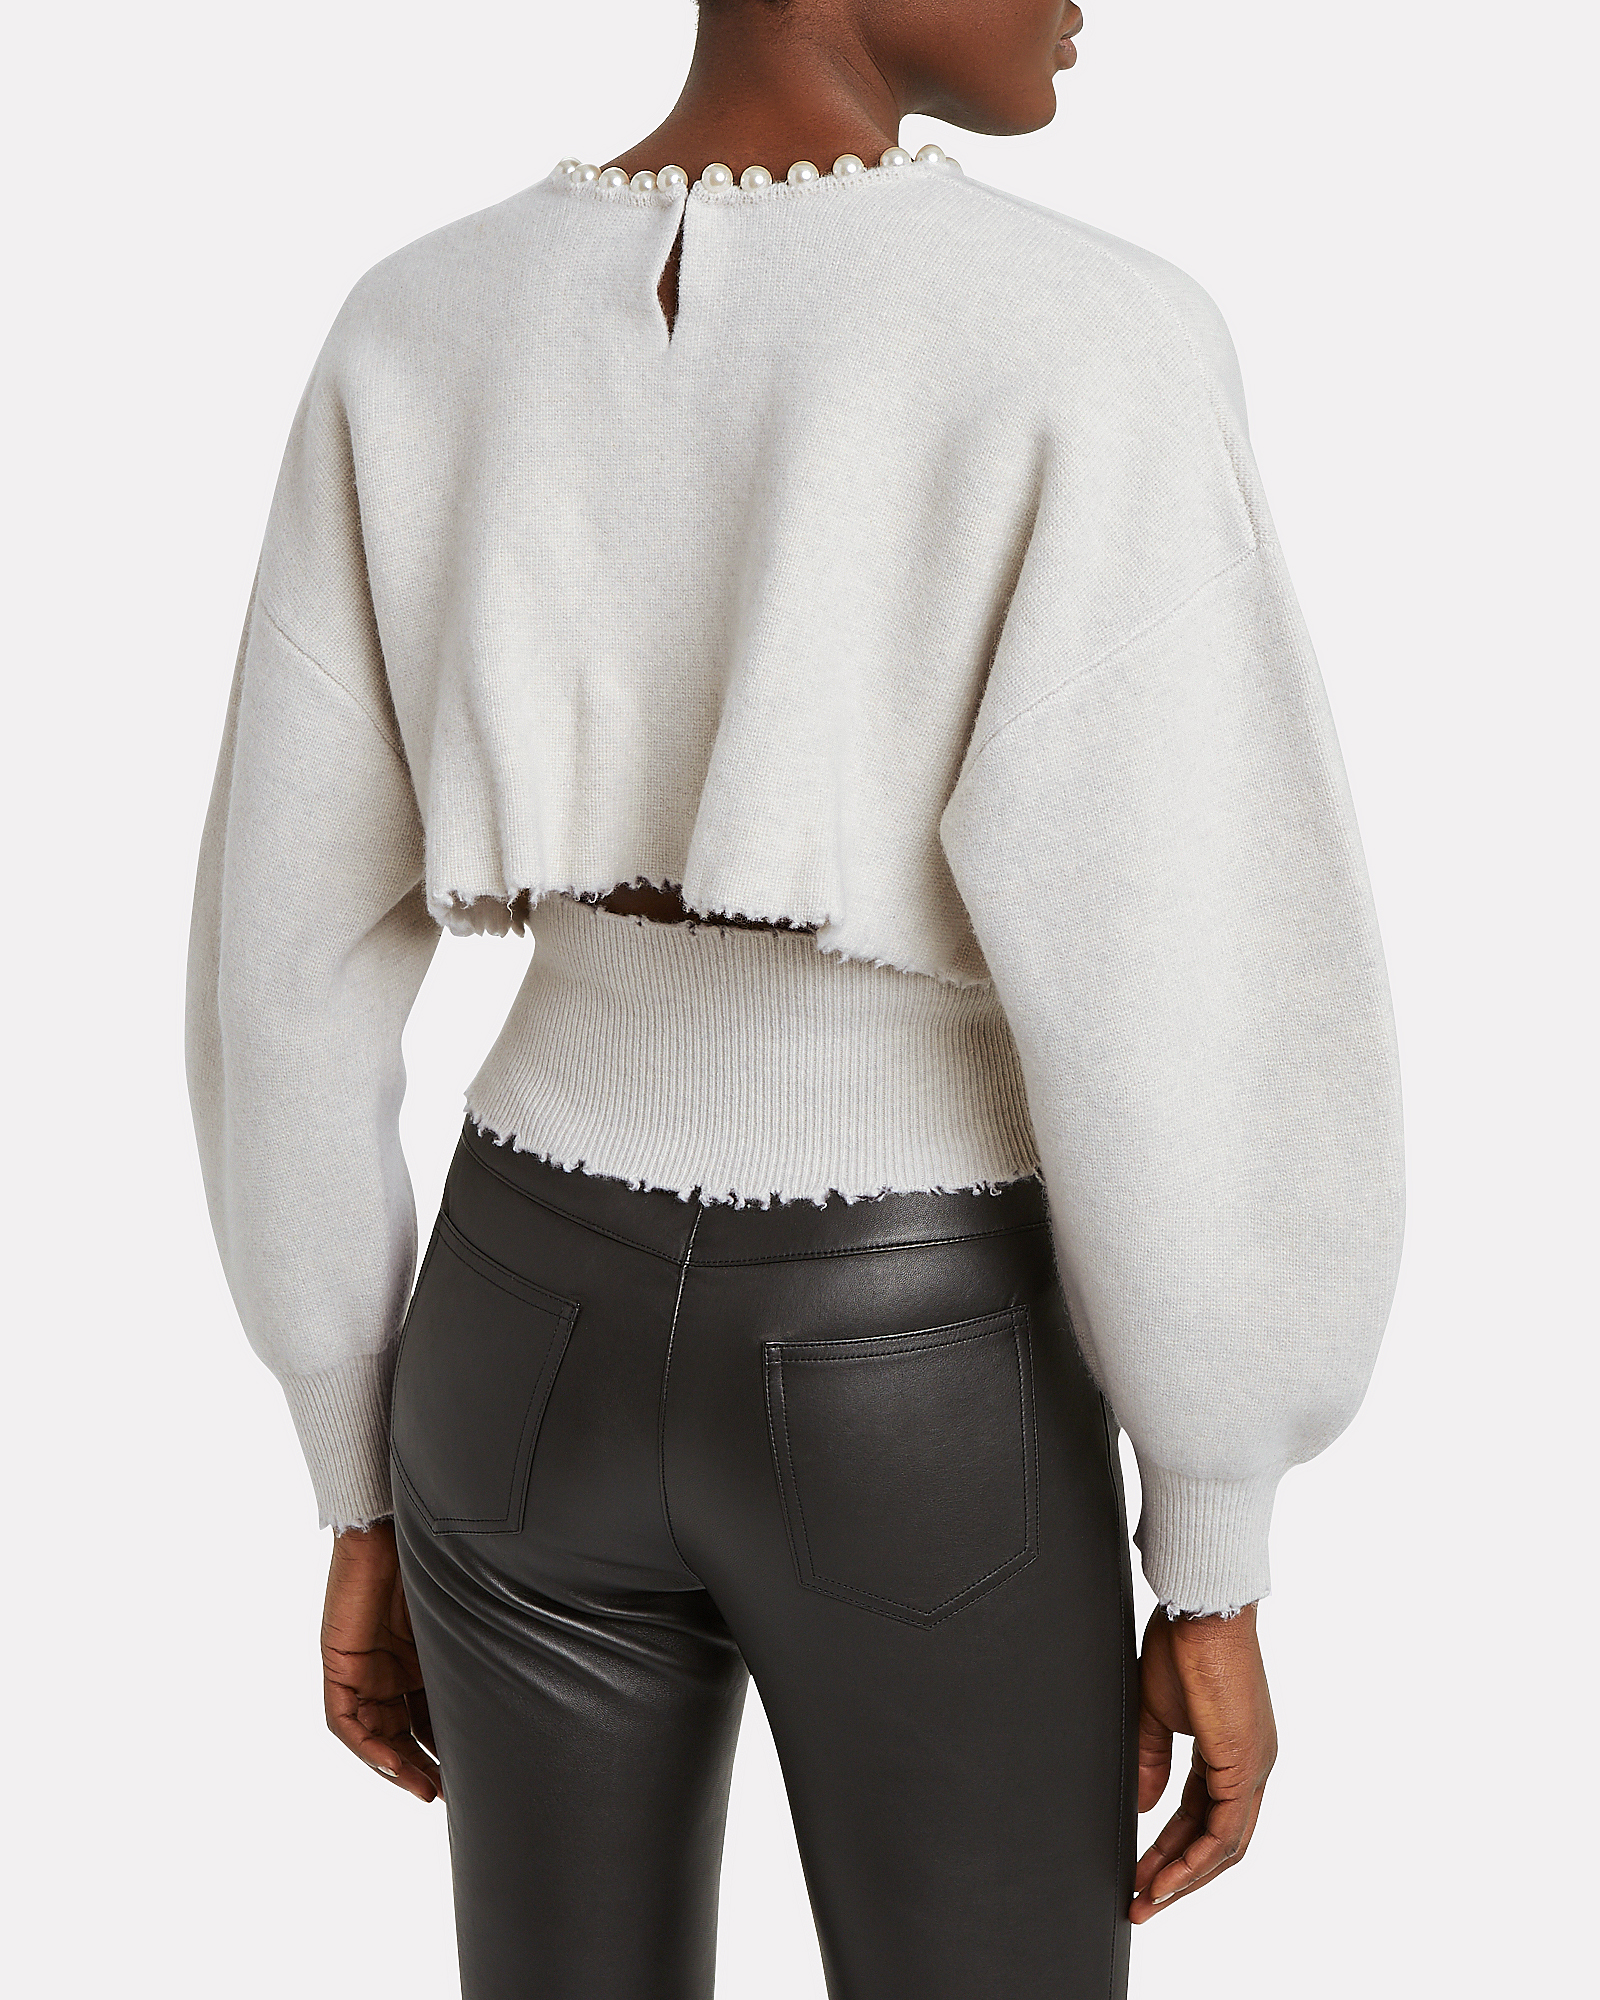 Alexander Wang | Pearl Necklace Wool-Cashmere Sweater | INTERMIX®